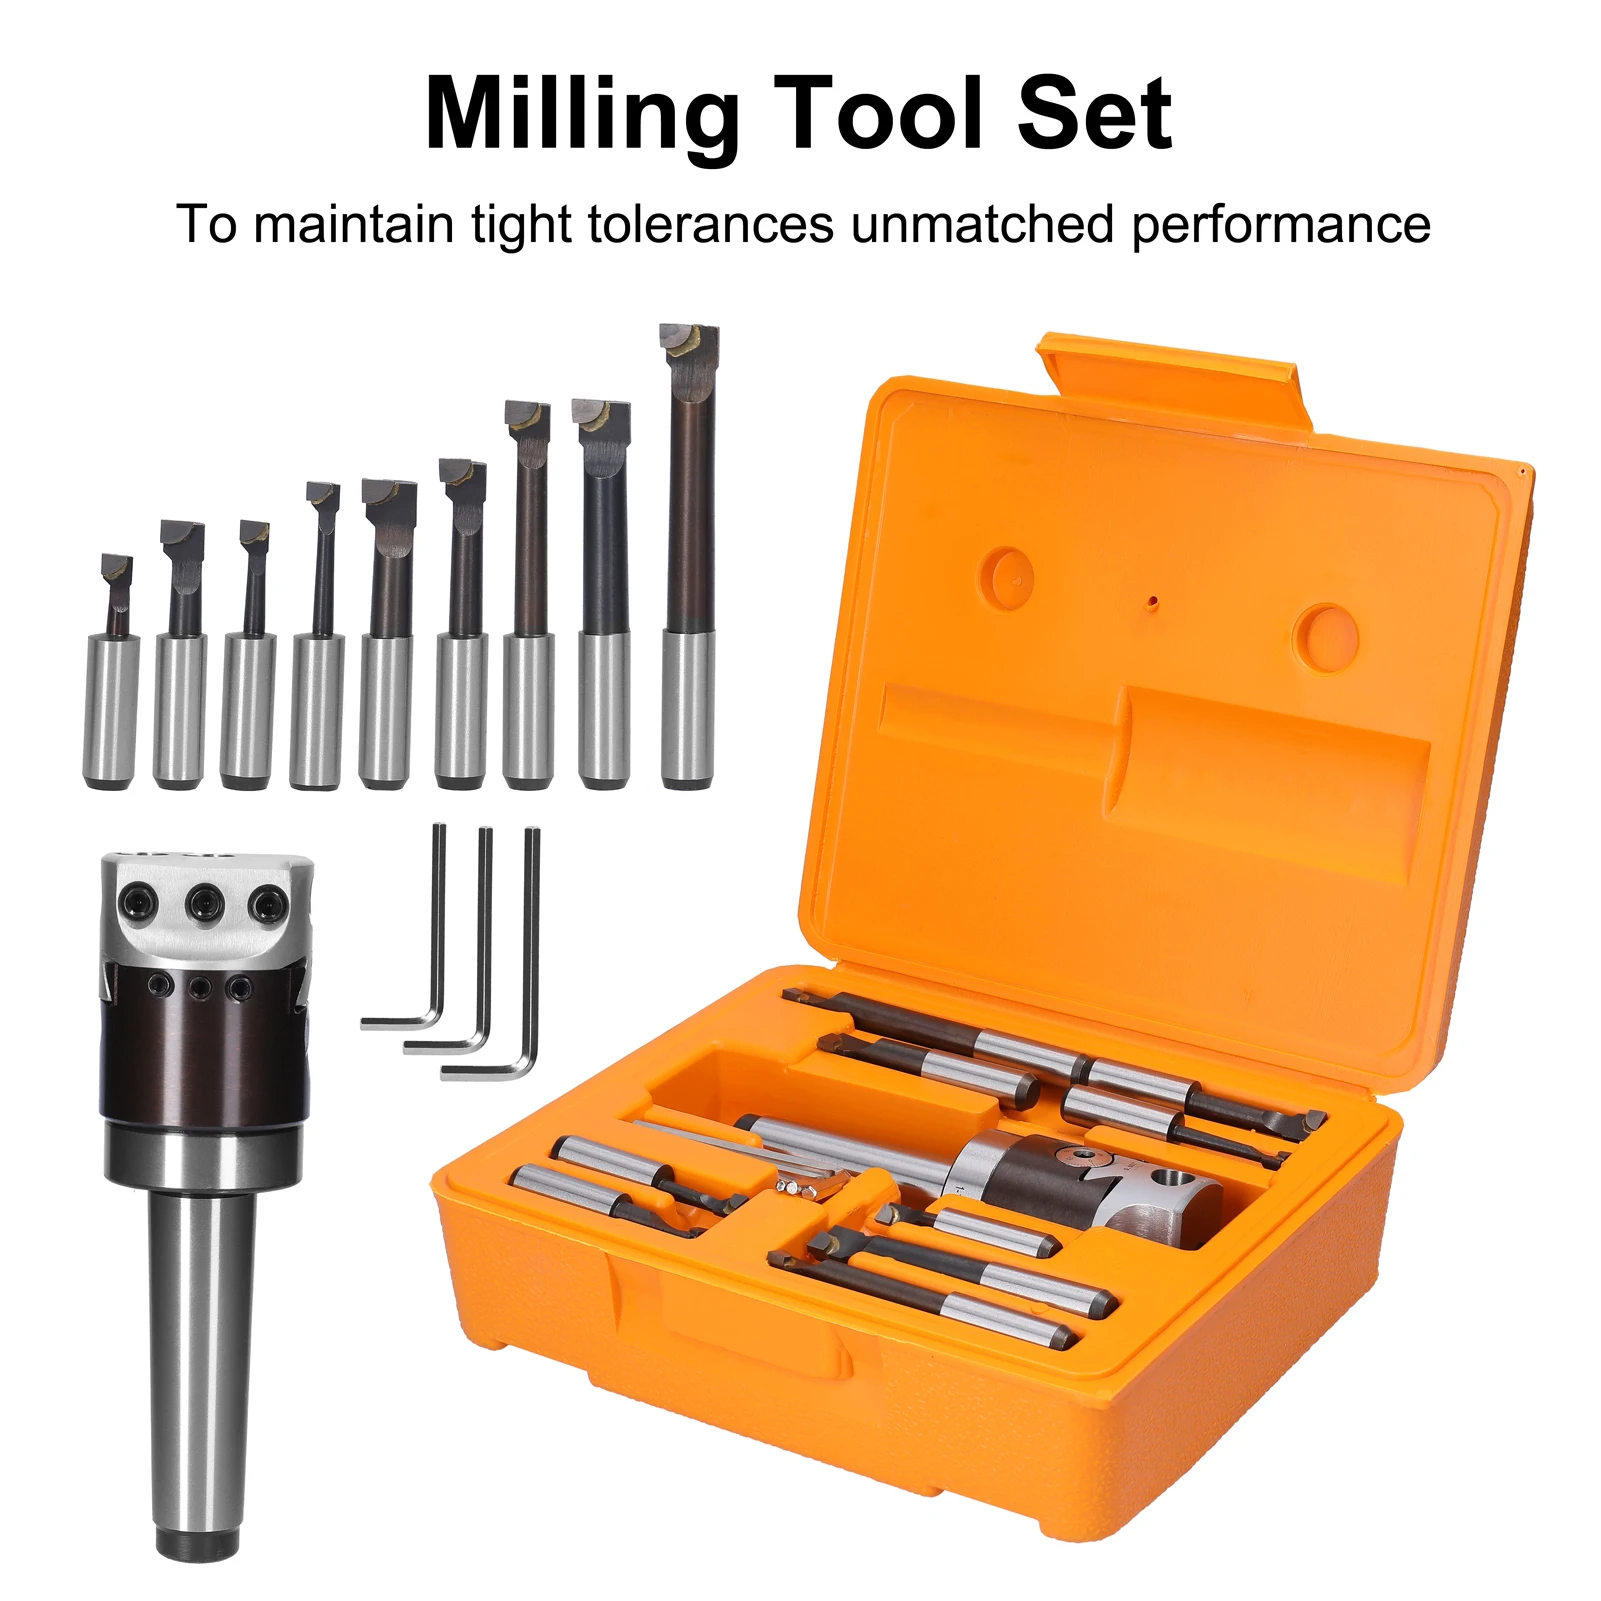 

MT3-F1 Boring Bar Kit Boring Heads MT3 Shank Holder Set with 1/2inch Carbide Boring Bar for Manufacturing and Milling Workpiece